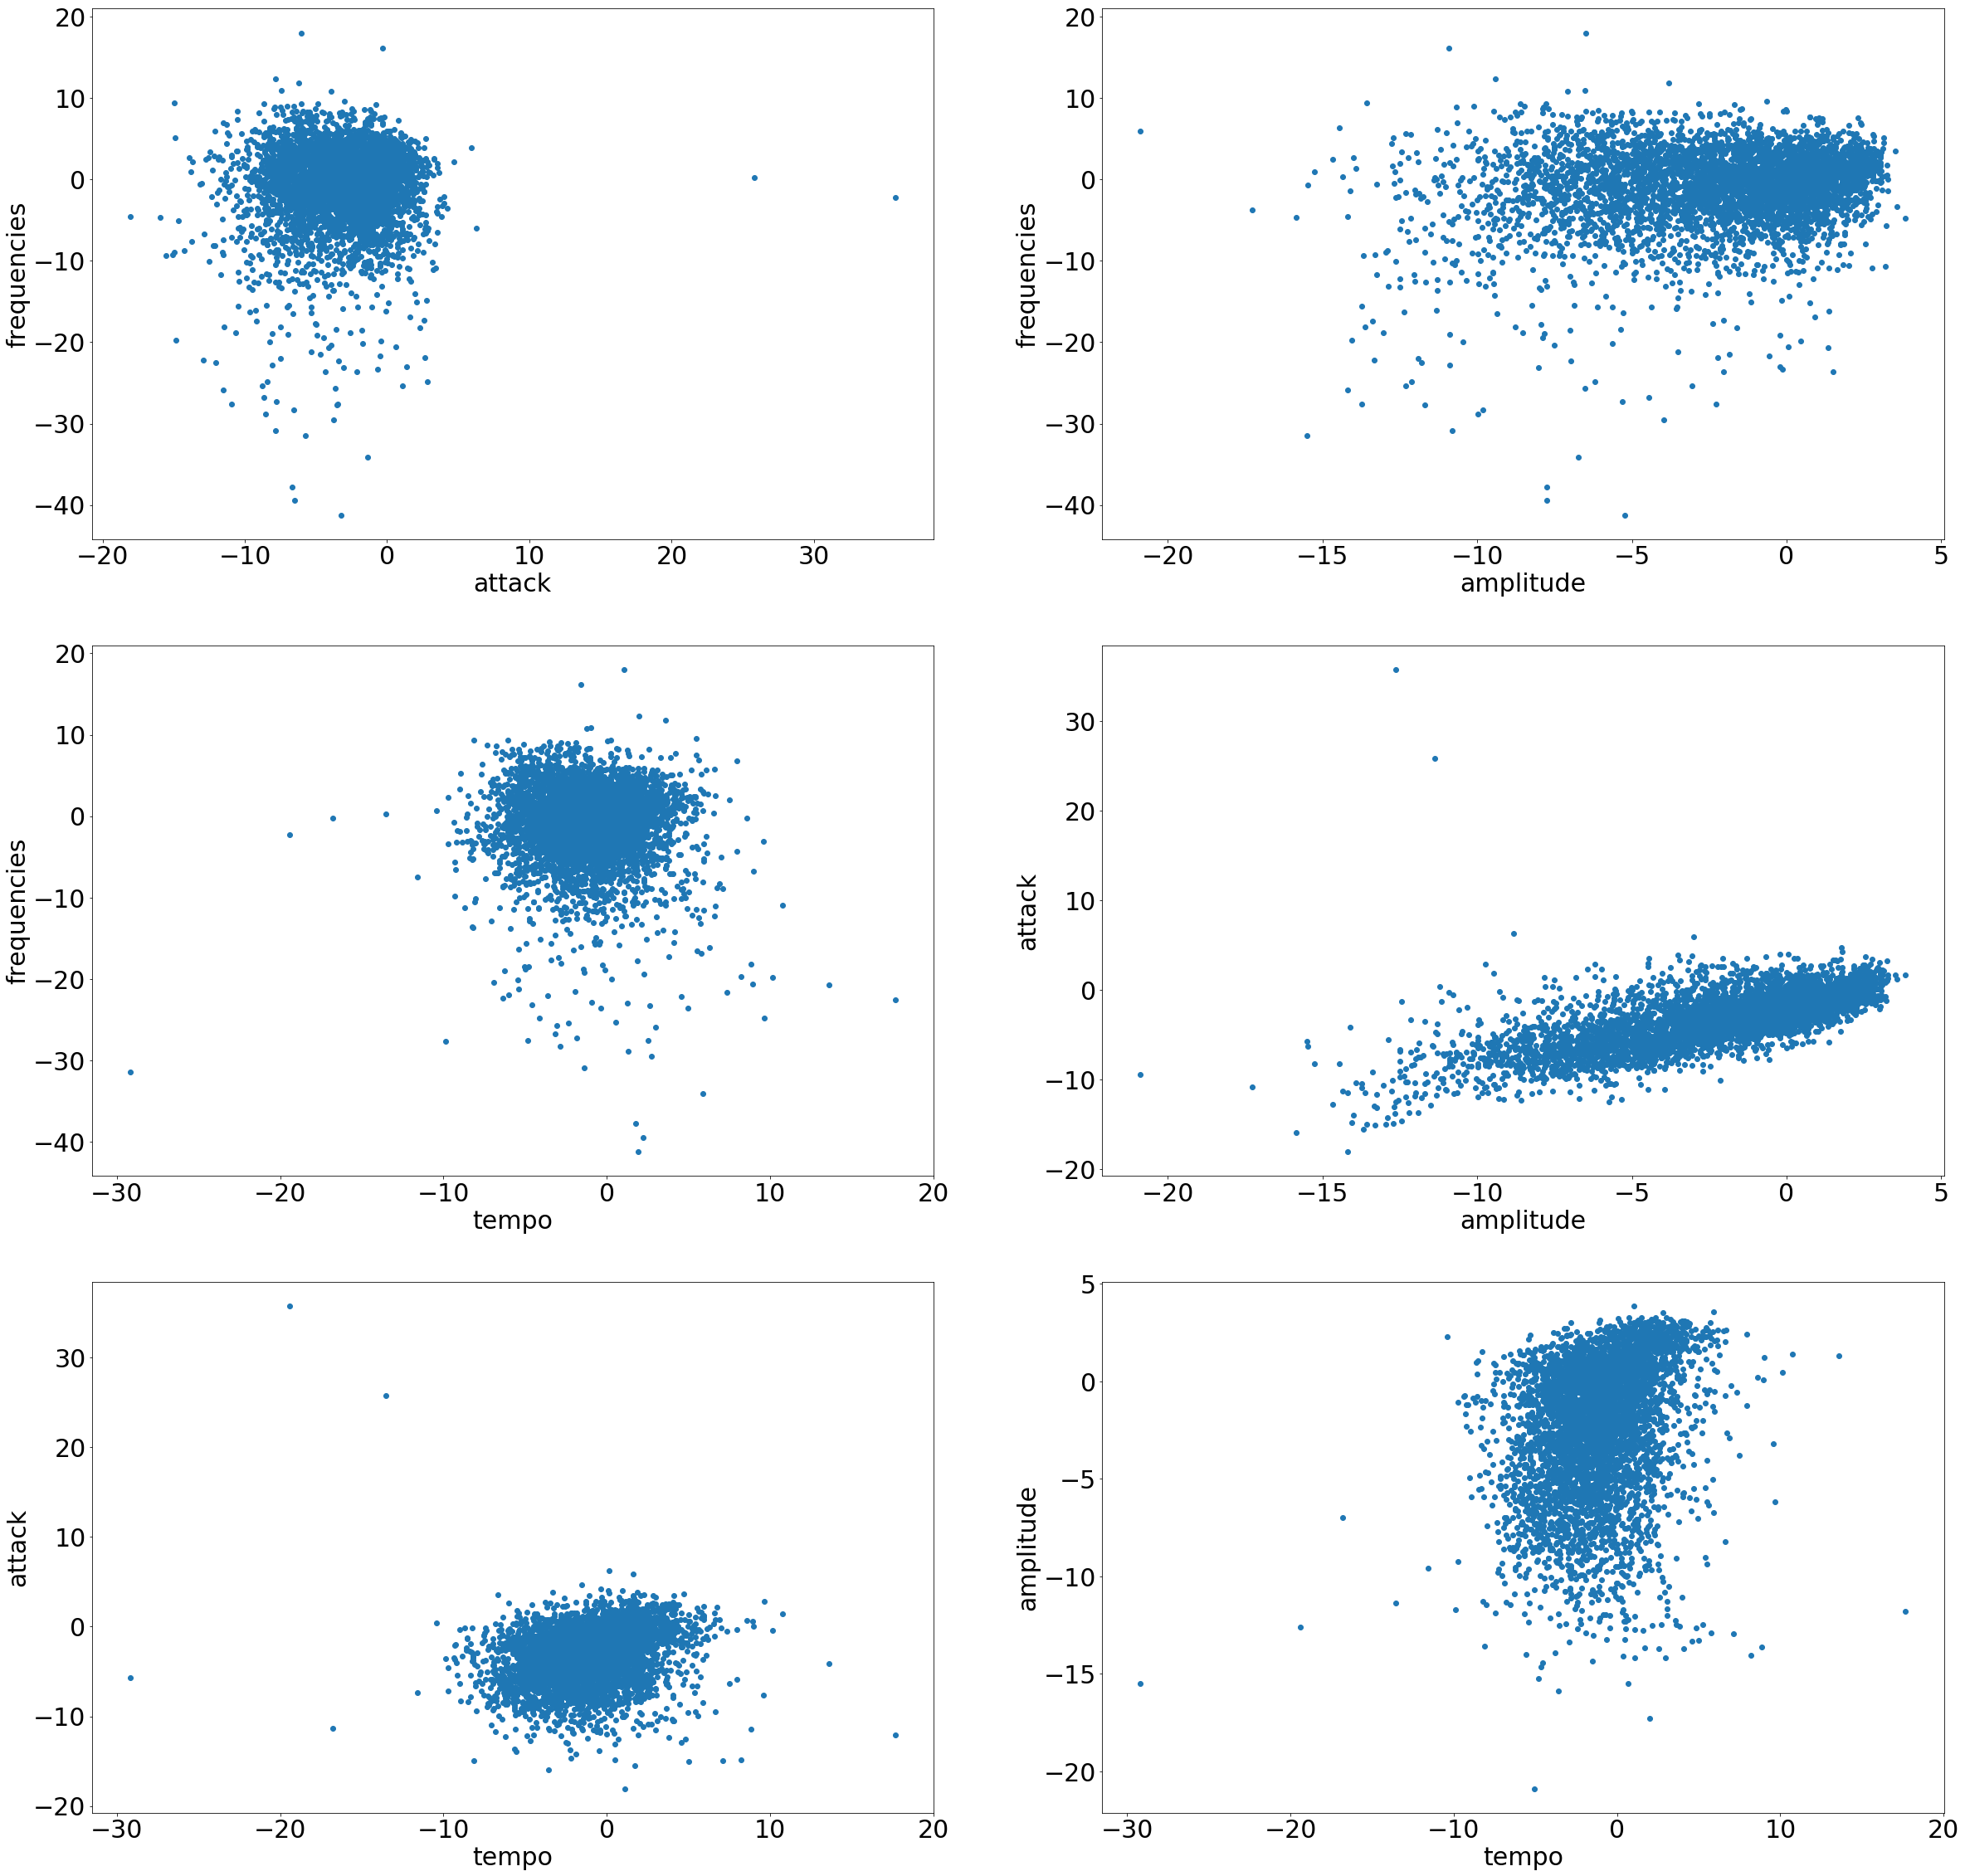 Scatter plot of every feature against each other